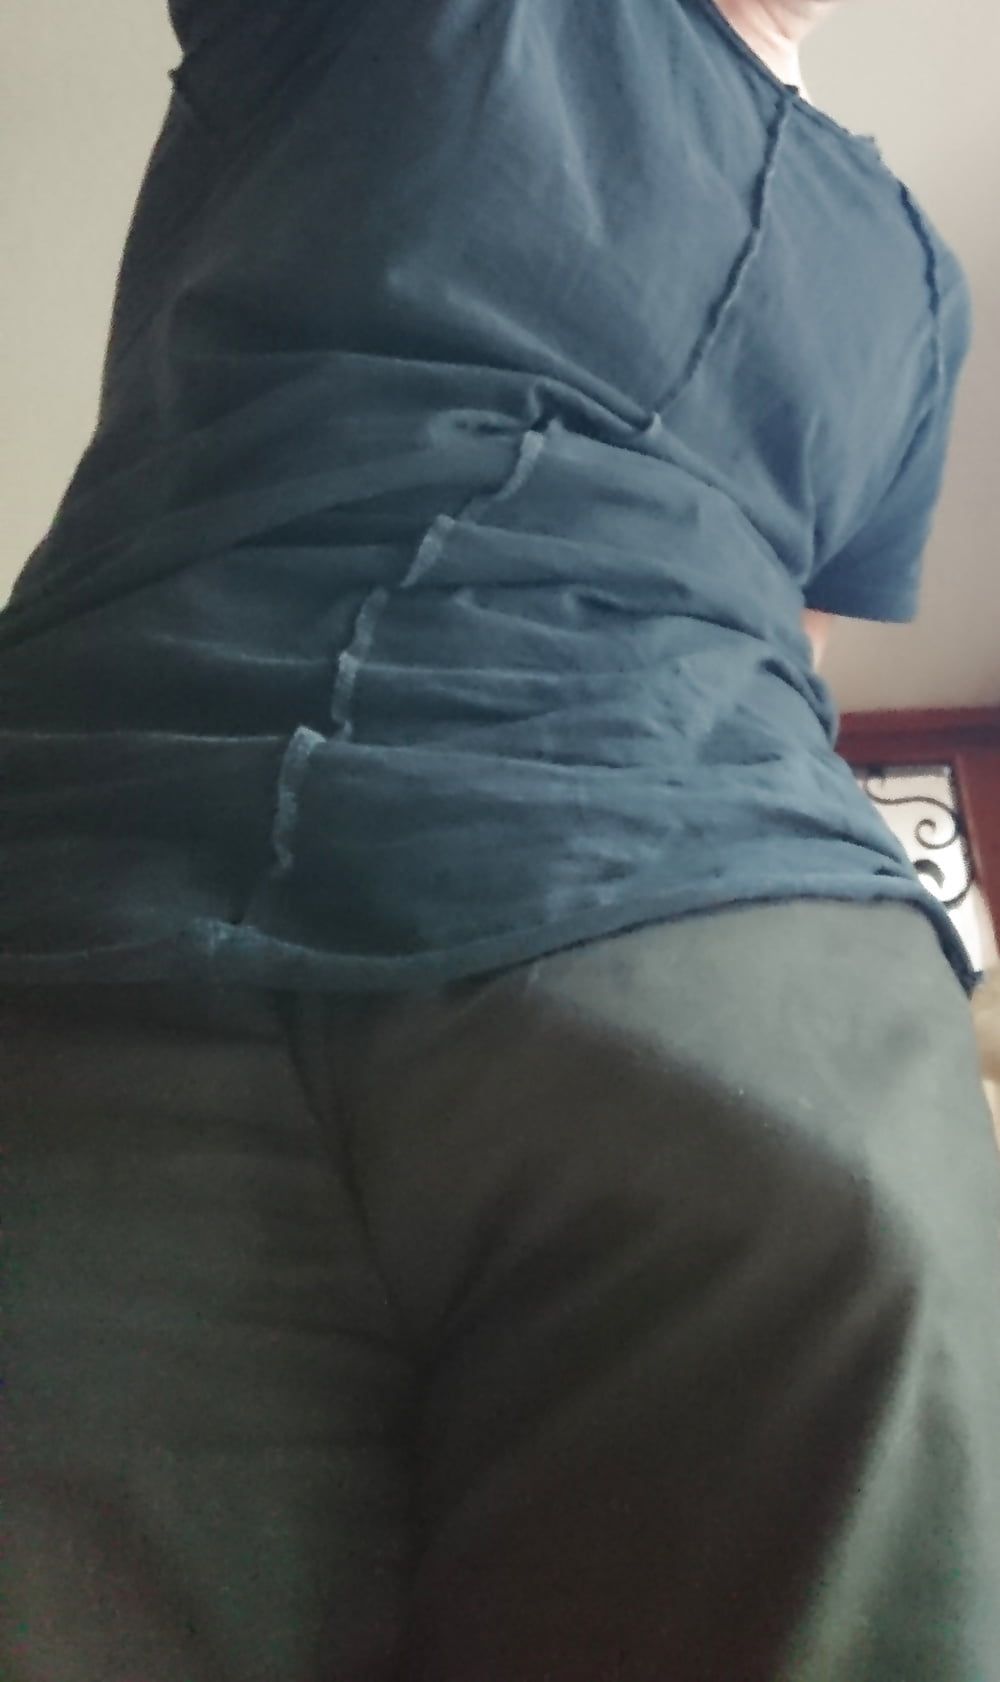 Giant cock in tight jeans #8